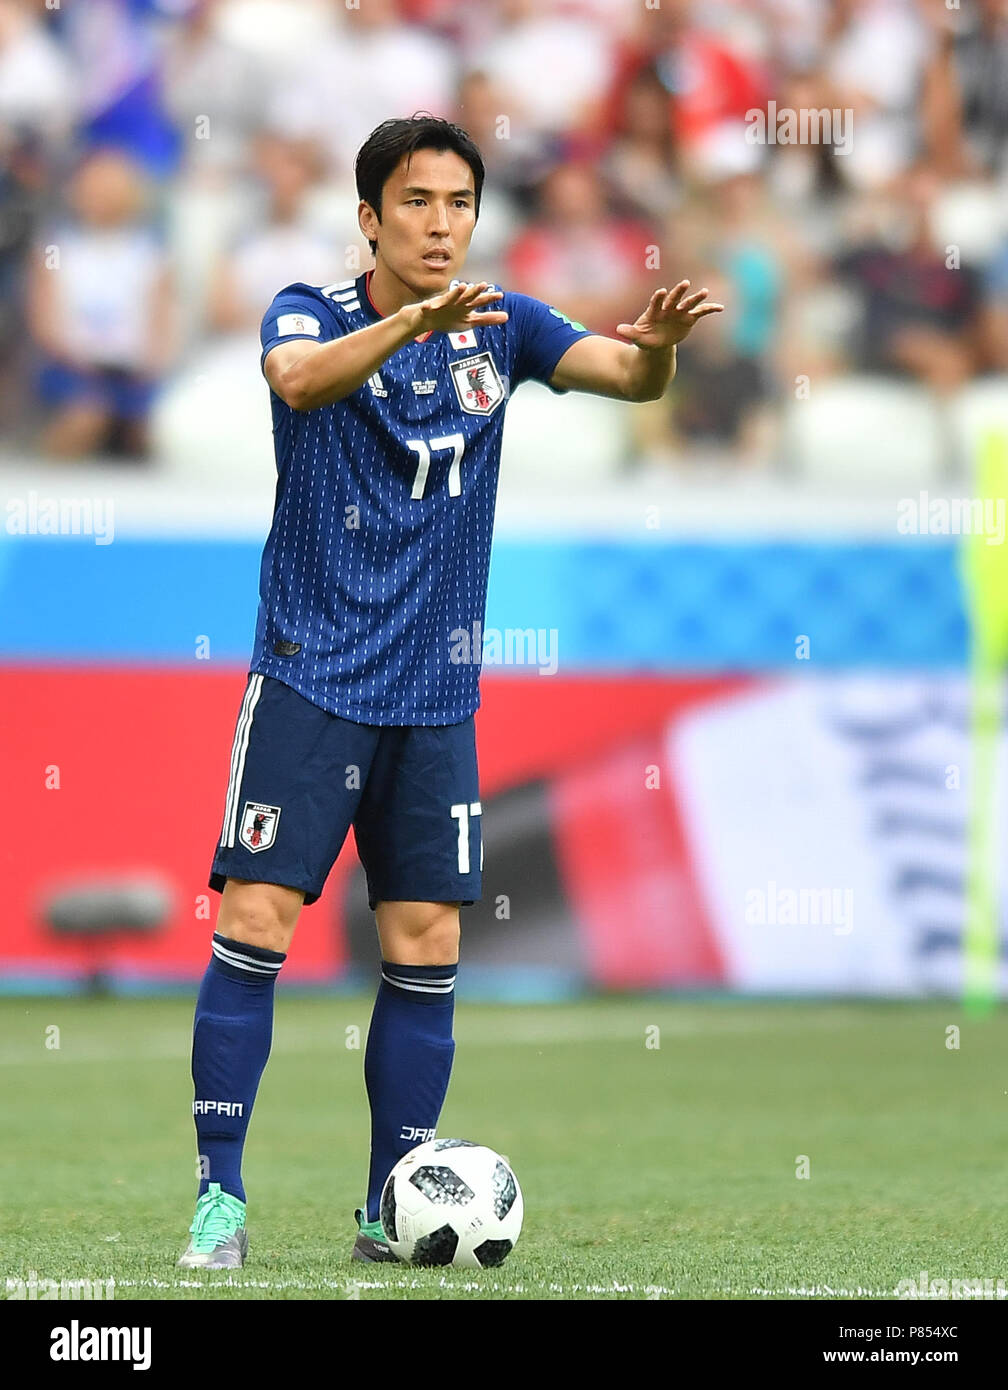 VOLGOGRAD, RUSSIA - JUNE 28: Makoto Hasebe of Japan reacts during the 2018 FIFA World Cup Russia group H match between Japan and Poland at Volgograd Arena on June 28, 2018 in Volgograd, Russia. (Photo by Lukasz Laskowski/PressFocus/MB Media/) Stock Photo